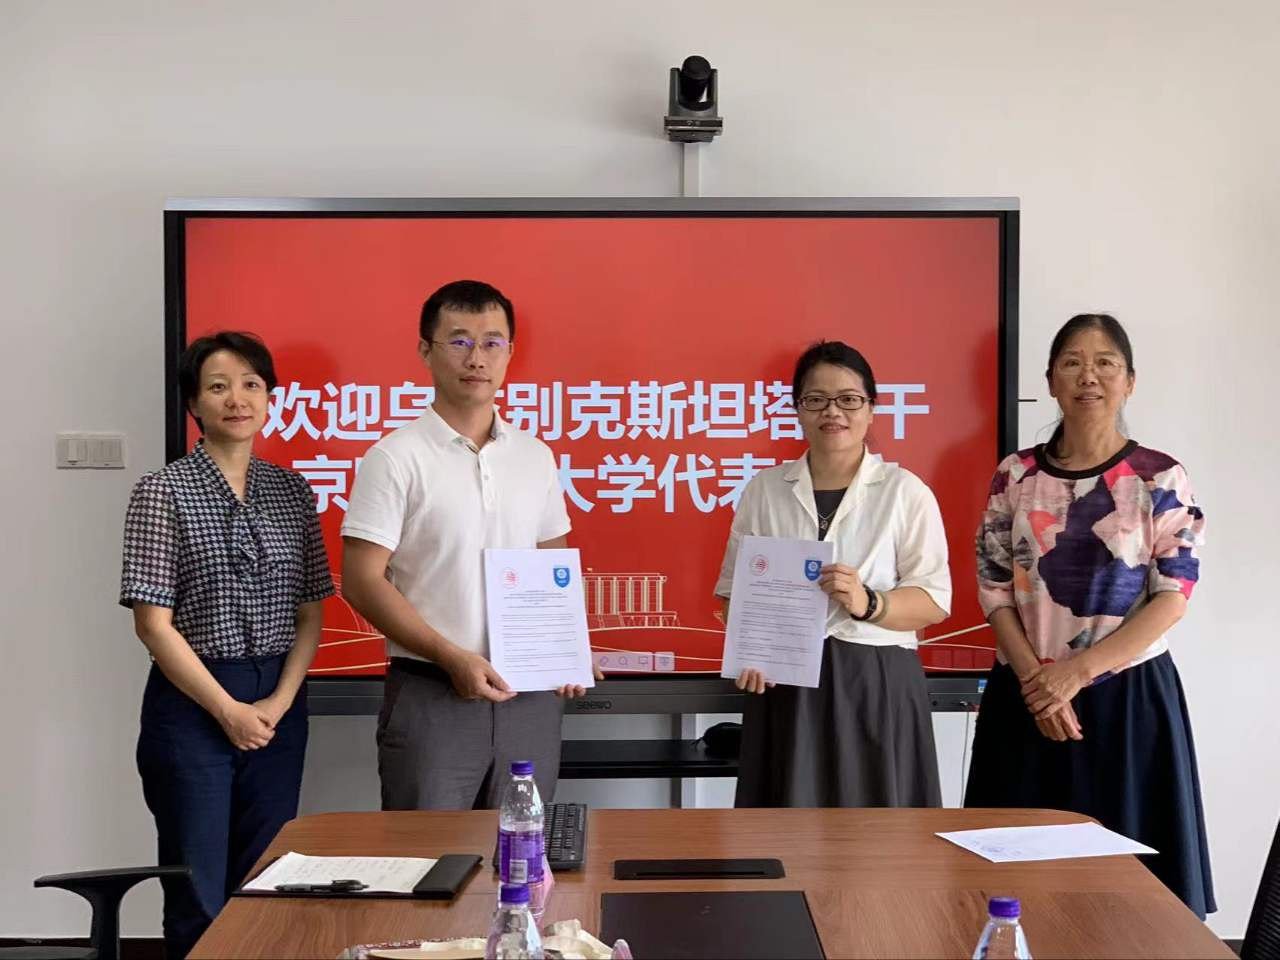 The Department of Translation Theory and Practice of Kimyo International University in Tashkent signed a memorandum with the Huachiao University of Language and Culture of the People's Republic of China